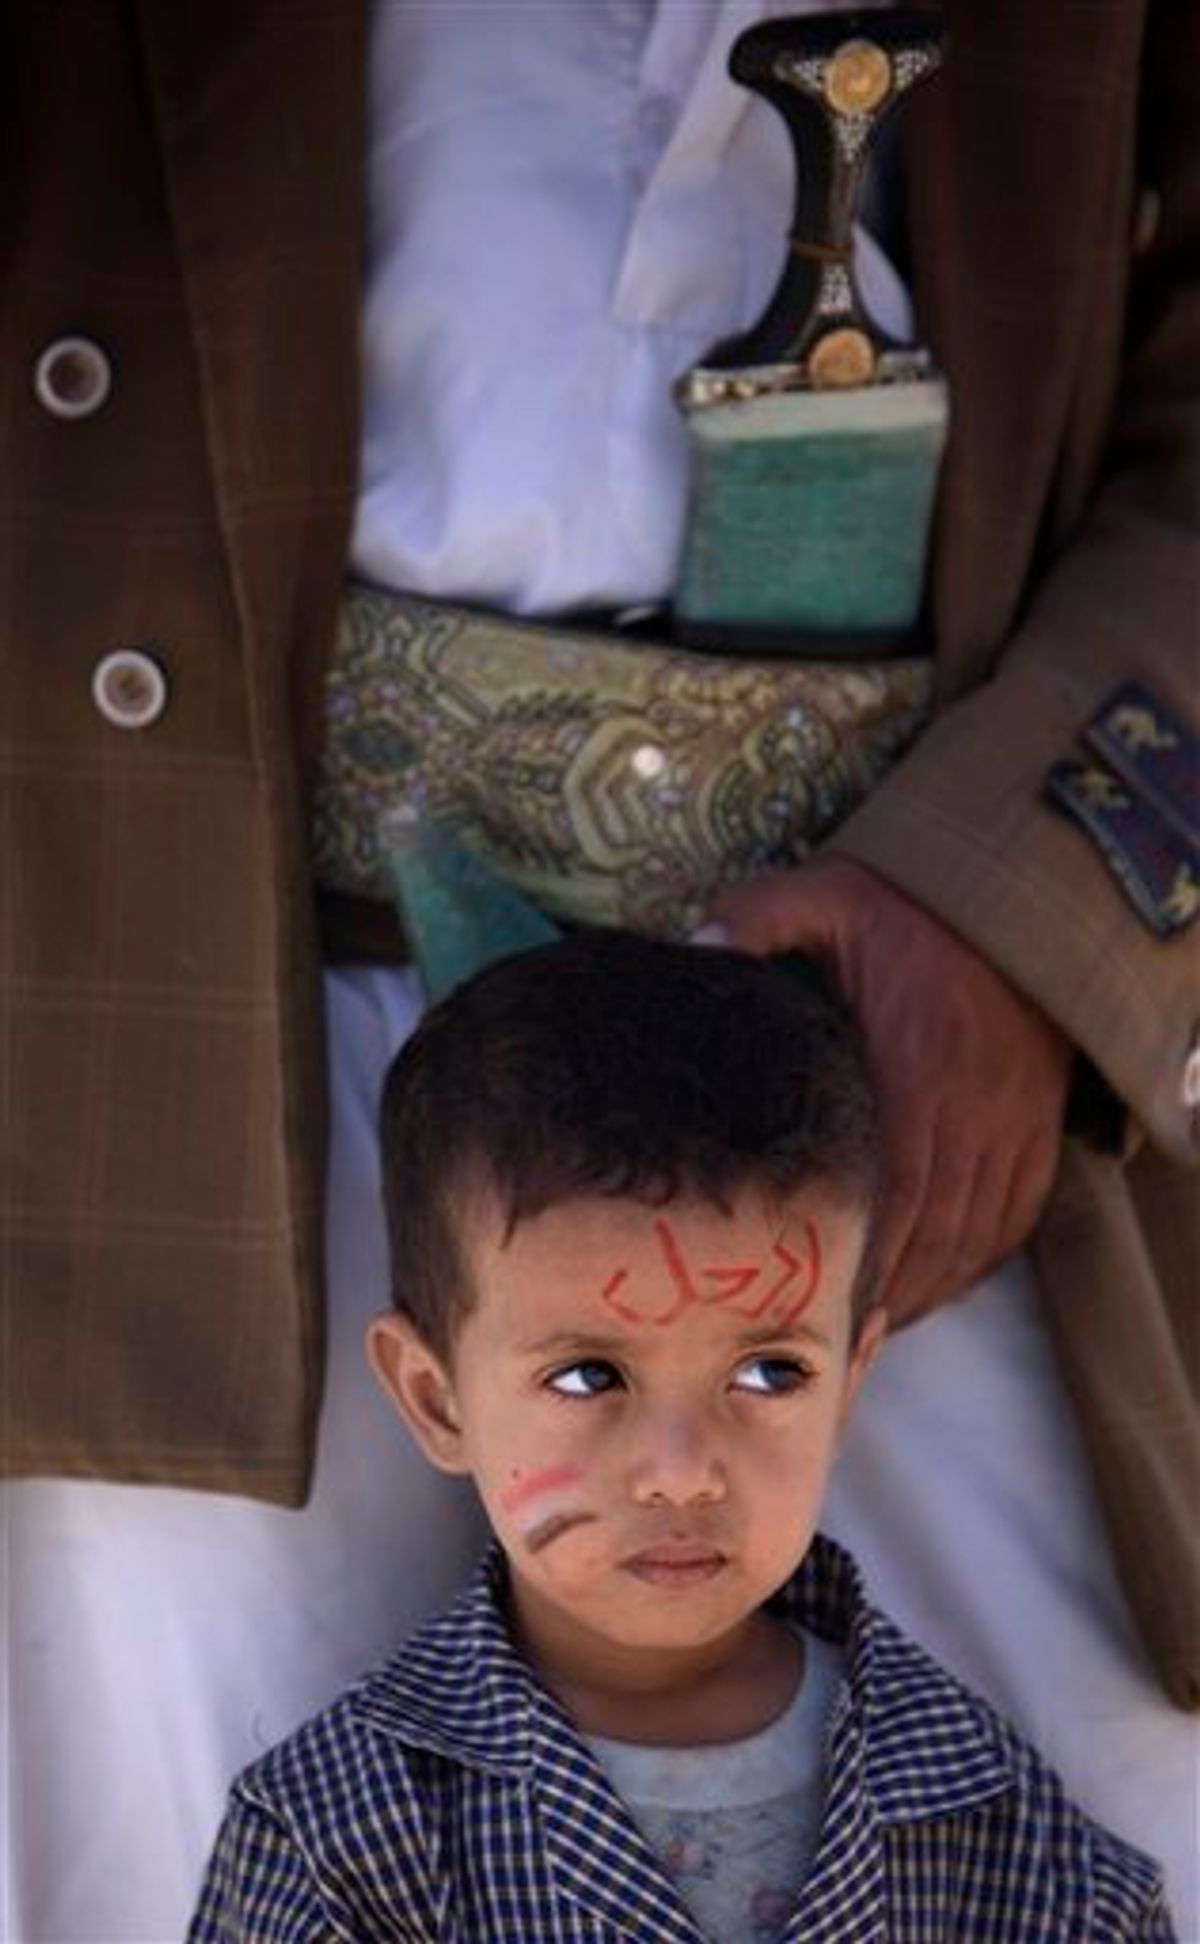 A Yemeni boy with writing on his face in Arabic which reads, "Leave" stands with his father during a demonstration demanding the resignation of Yemeni President Ali Abdullah Saleh in Sanaa, Yemen, Thursday, April 21, 2011. The head of a regional Gulf Arab political group was in Yemen on Thursday to lead a fresh effort to find a way out for the country's embattled president who has faced two months of mass protests demanding his ouster. (AP Photo/Muhammed Muheisen) (AP)